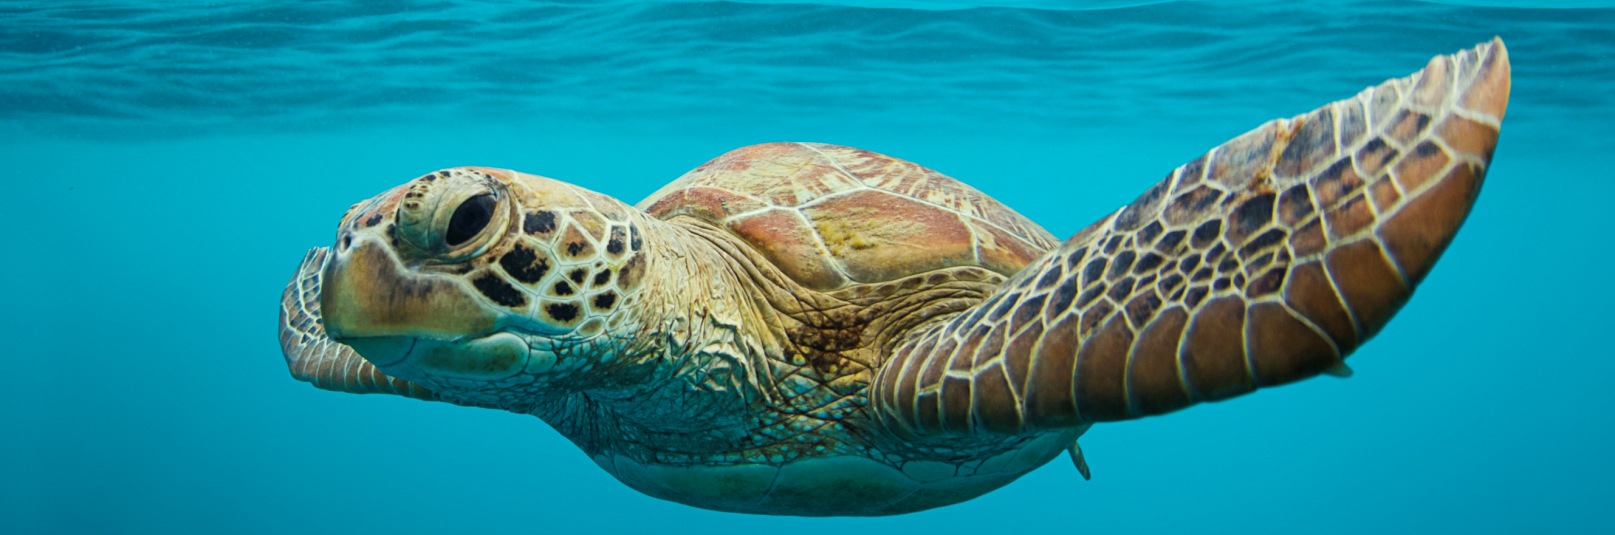 Whitsunday Turtle - Ocean Clean Prints Photography 